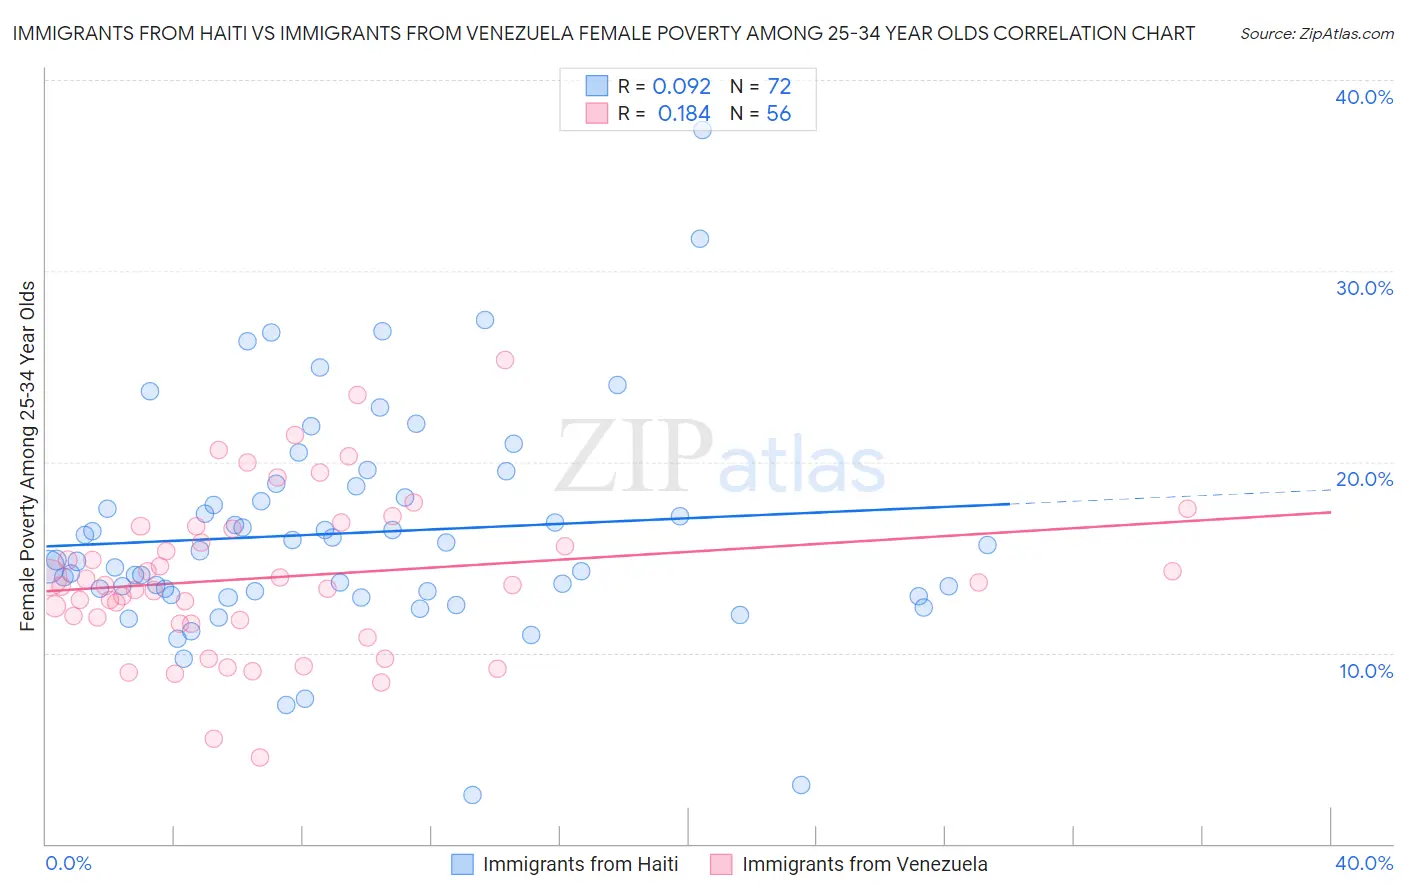 Immigrants from Haiti vs Immigrants from Venezuela Female Poverty Among 25-34 Year Olds